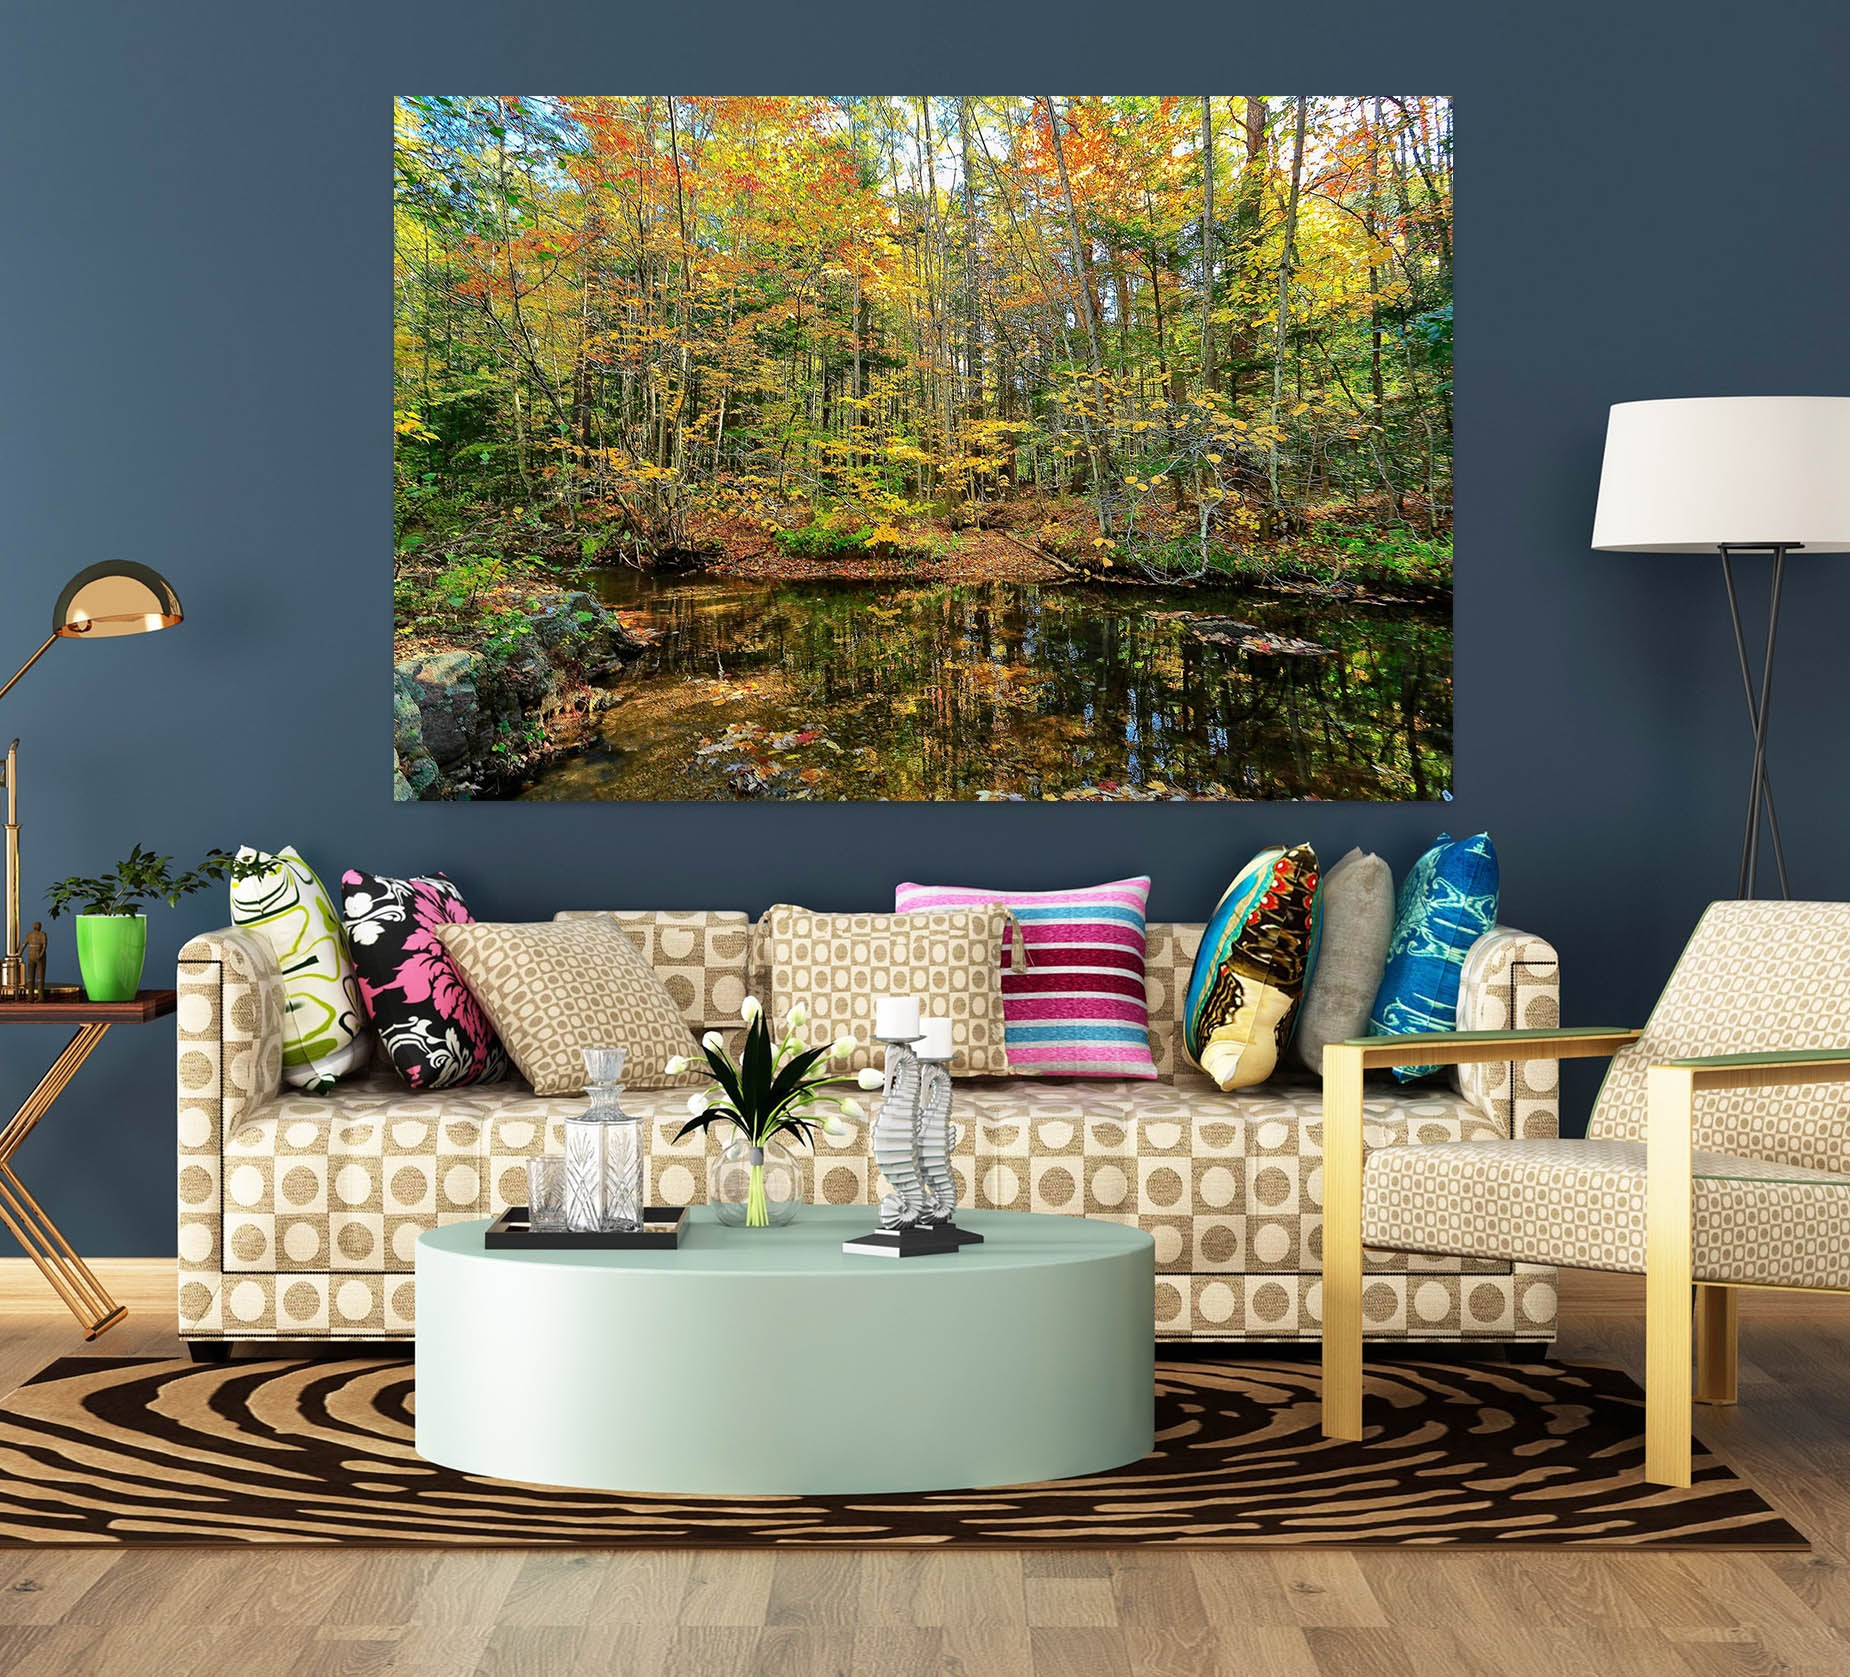 3D Pond Reflections 62123 Kathy Barefield Wall Sticker